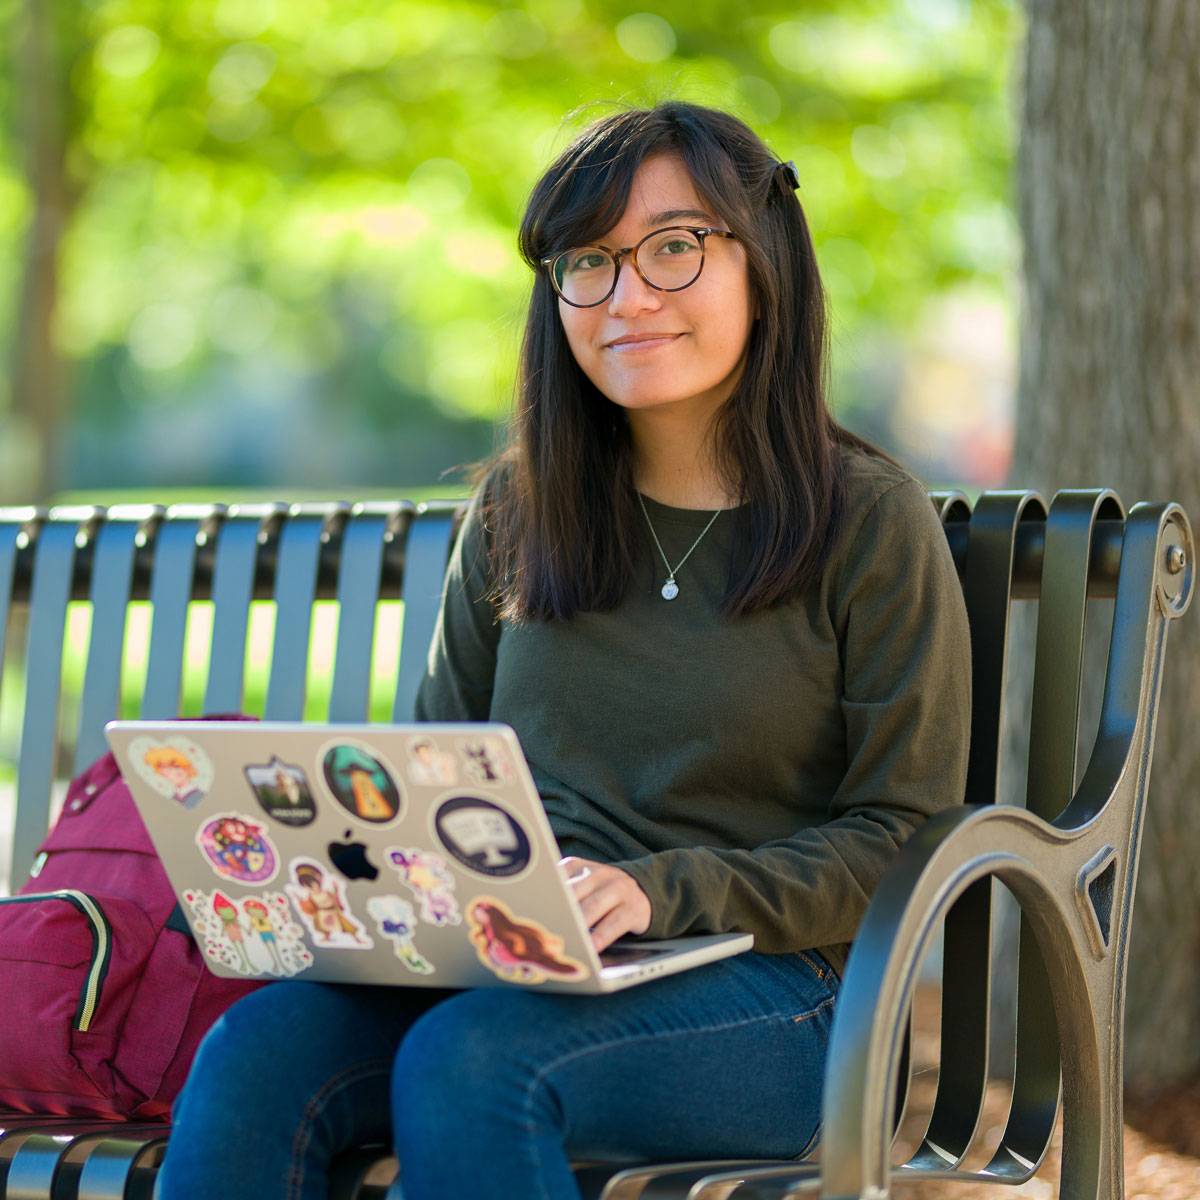 USU student on a bench using a laptop.